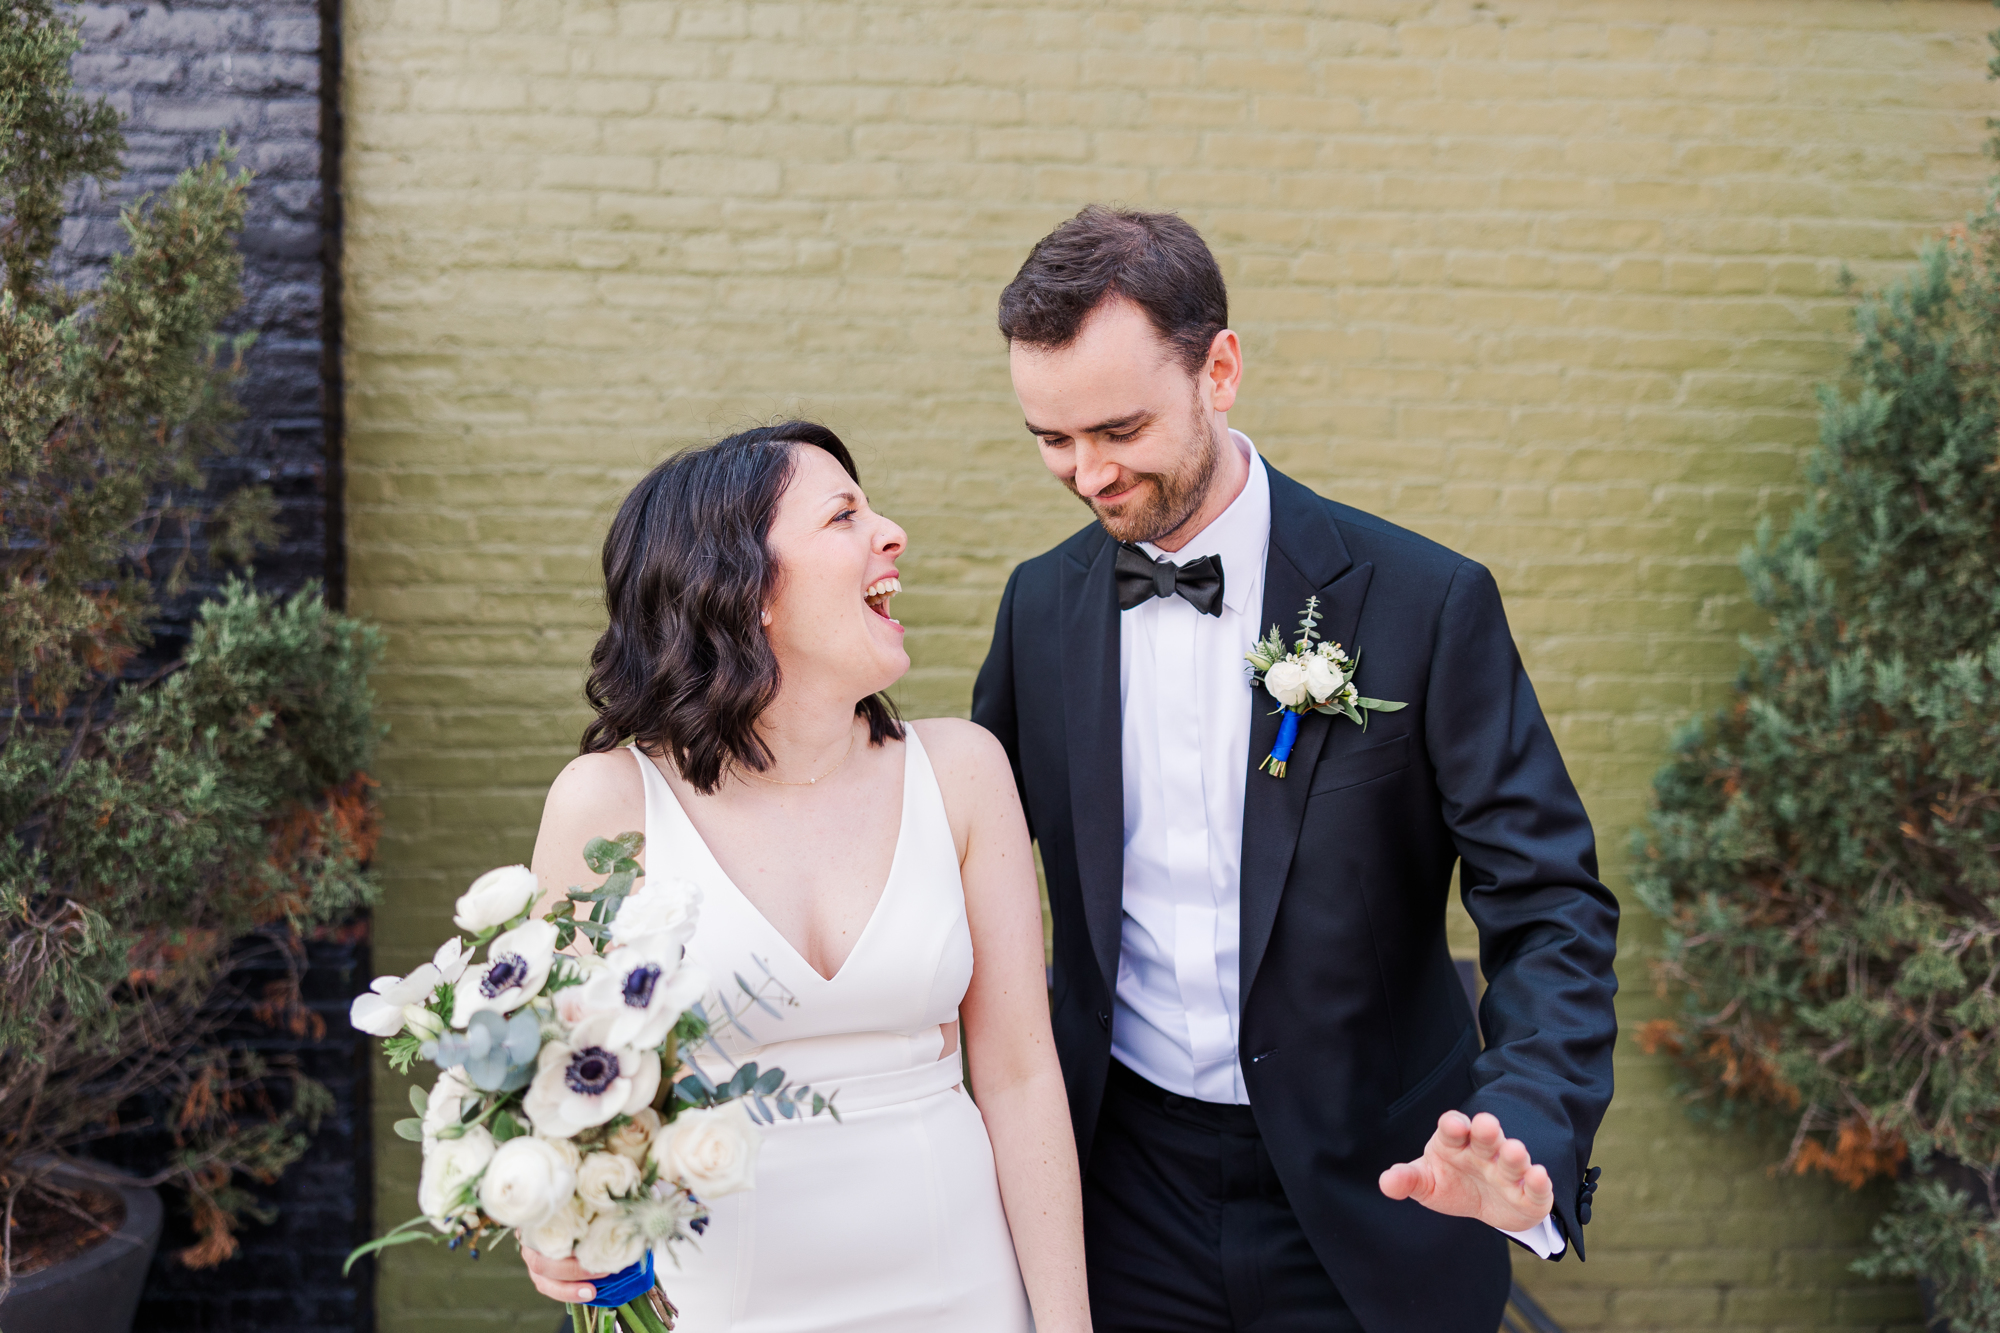 Cheerful Spring Wedding Photos at The Green Building in Brooklyn NY